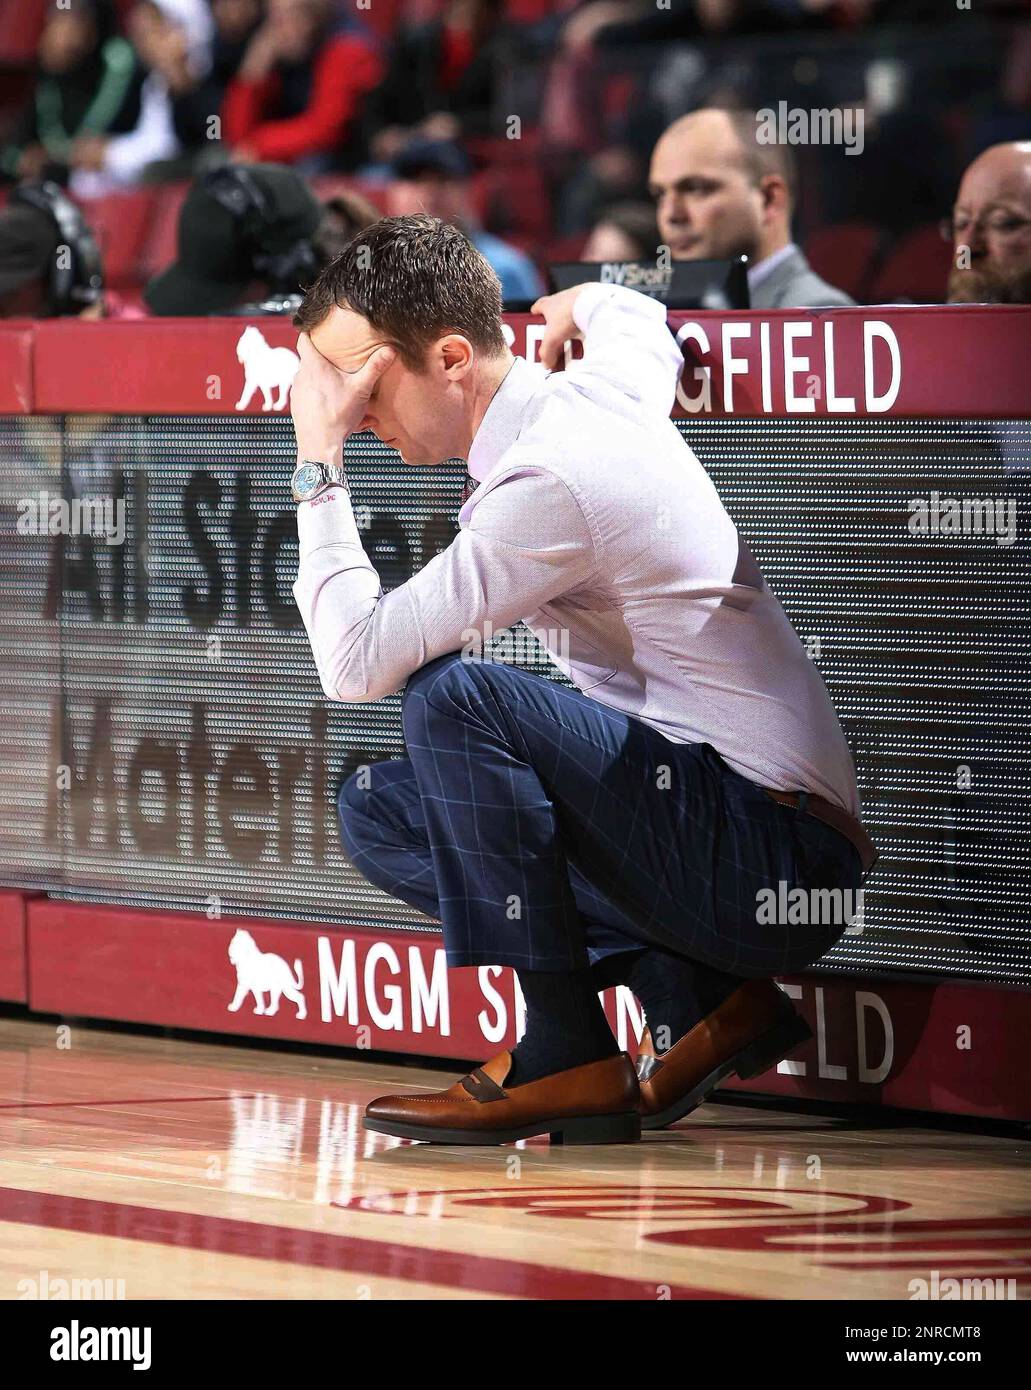 Massachusetts coach Matt McCall reacts during the second half of the team's  NCAA college basketball game against George Washington on Saturday, Jan.  18, 2020, in Amherst, Mass. (J. Anthony Roberts/The Republican via